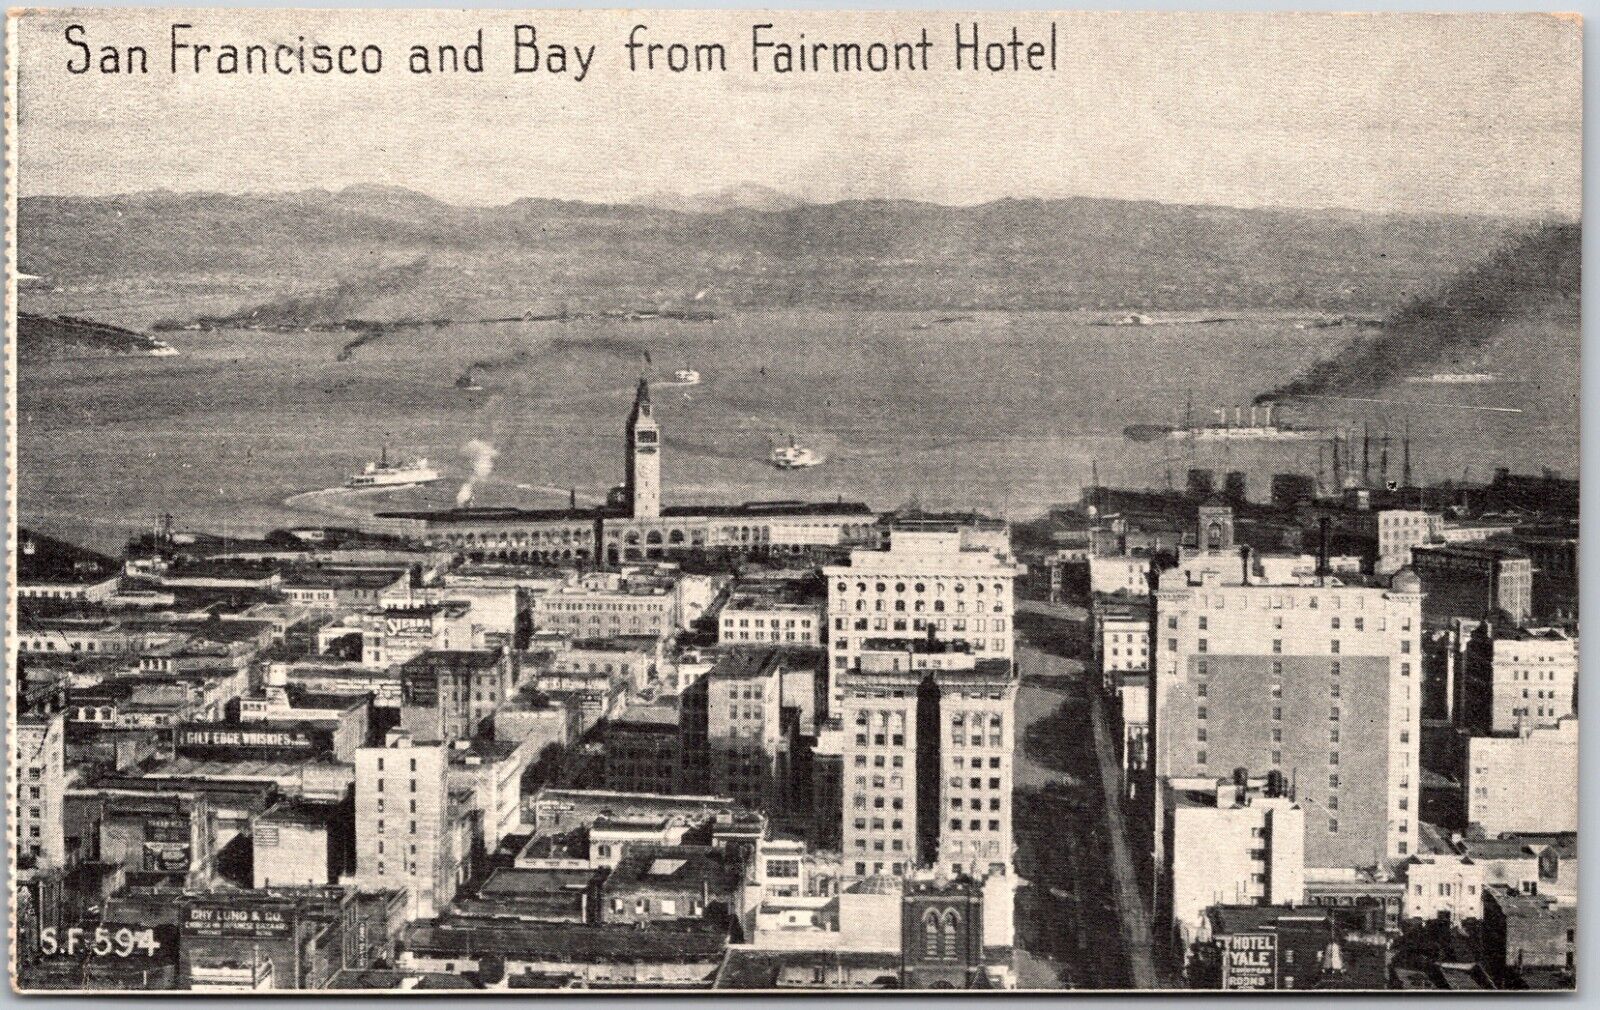 San Francisco and Bay from Fairmont Hotel, California - Postcard